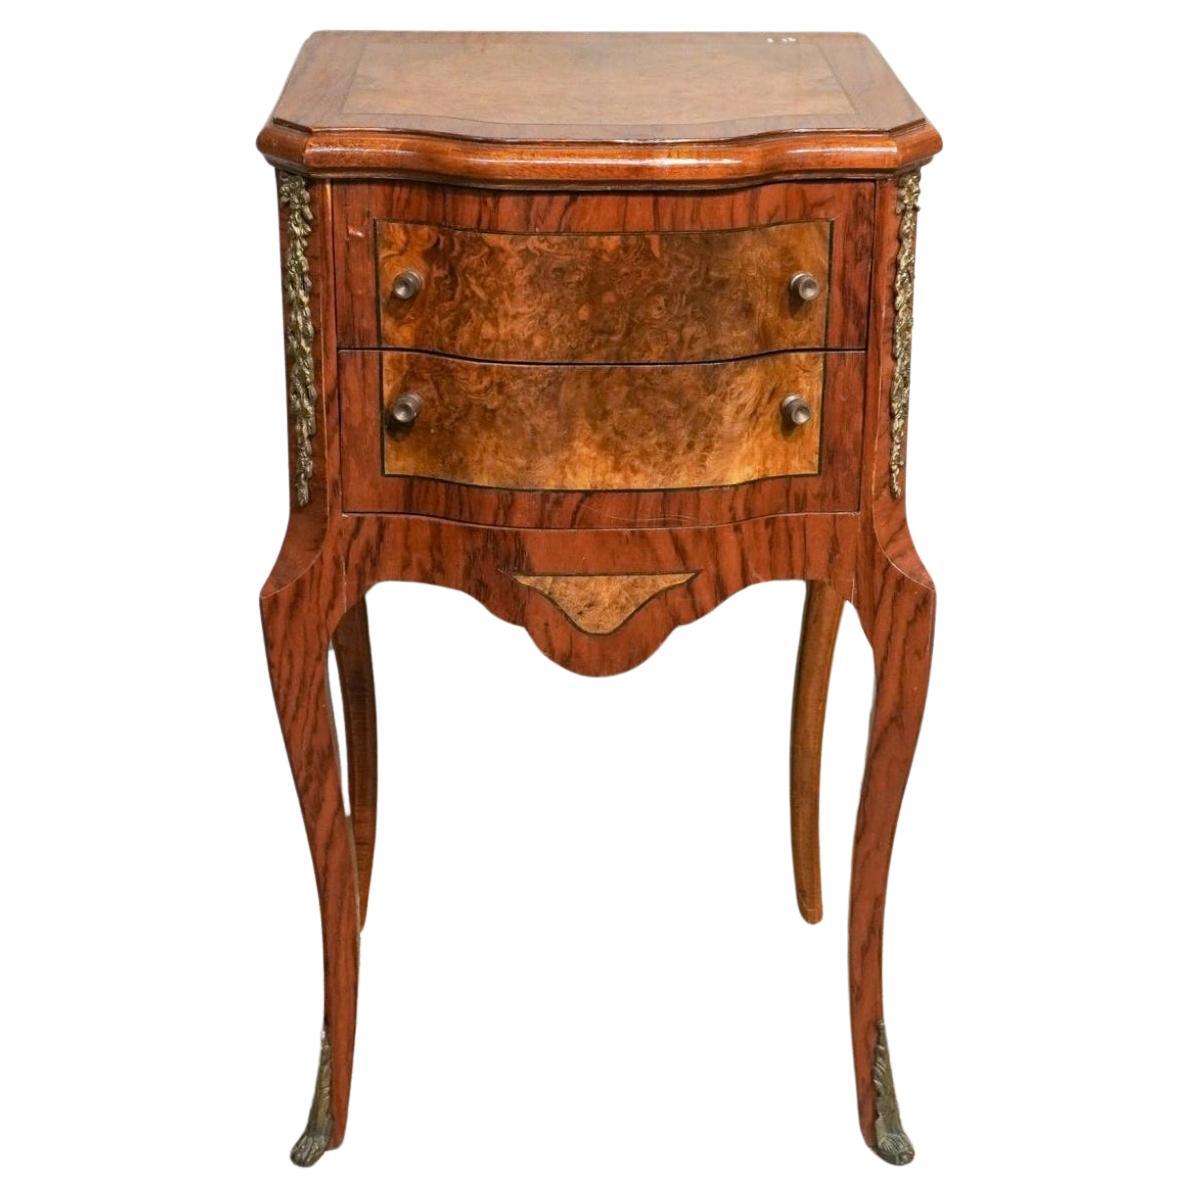 Early 20th Century Louis XV Style Brass Mounted Inlaid Burl Fruitwood Side Table.
Measure 17.25W x 13 x 30.75H.
Drawers are 12.5